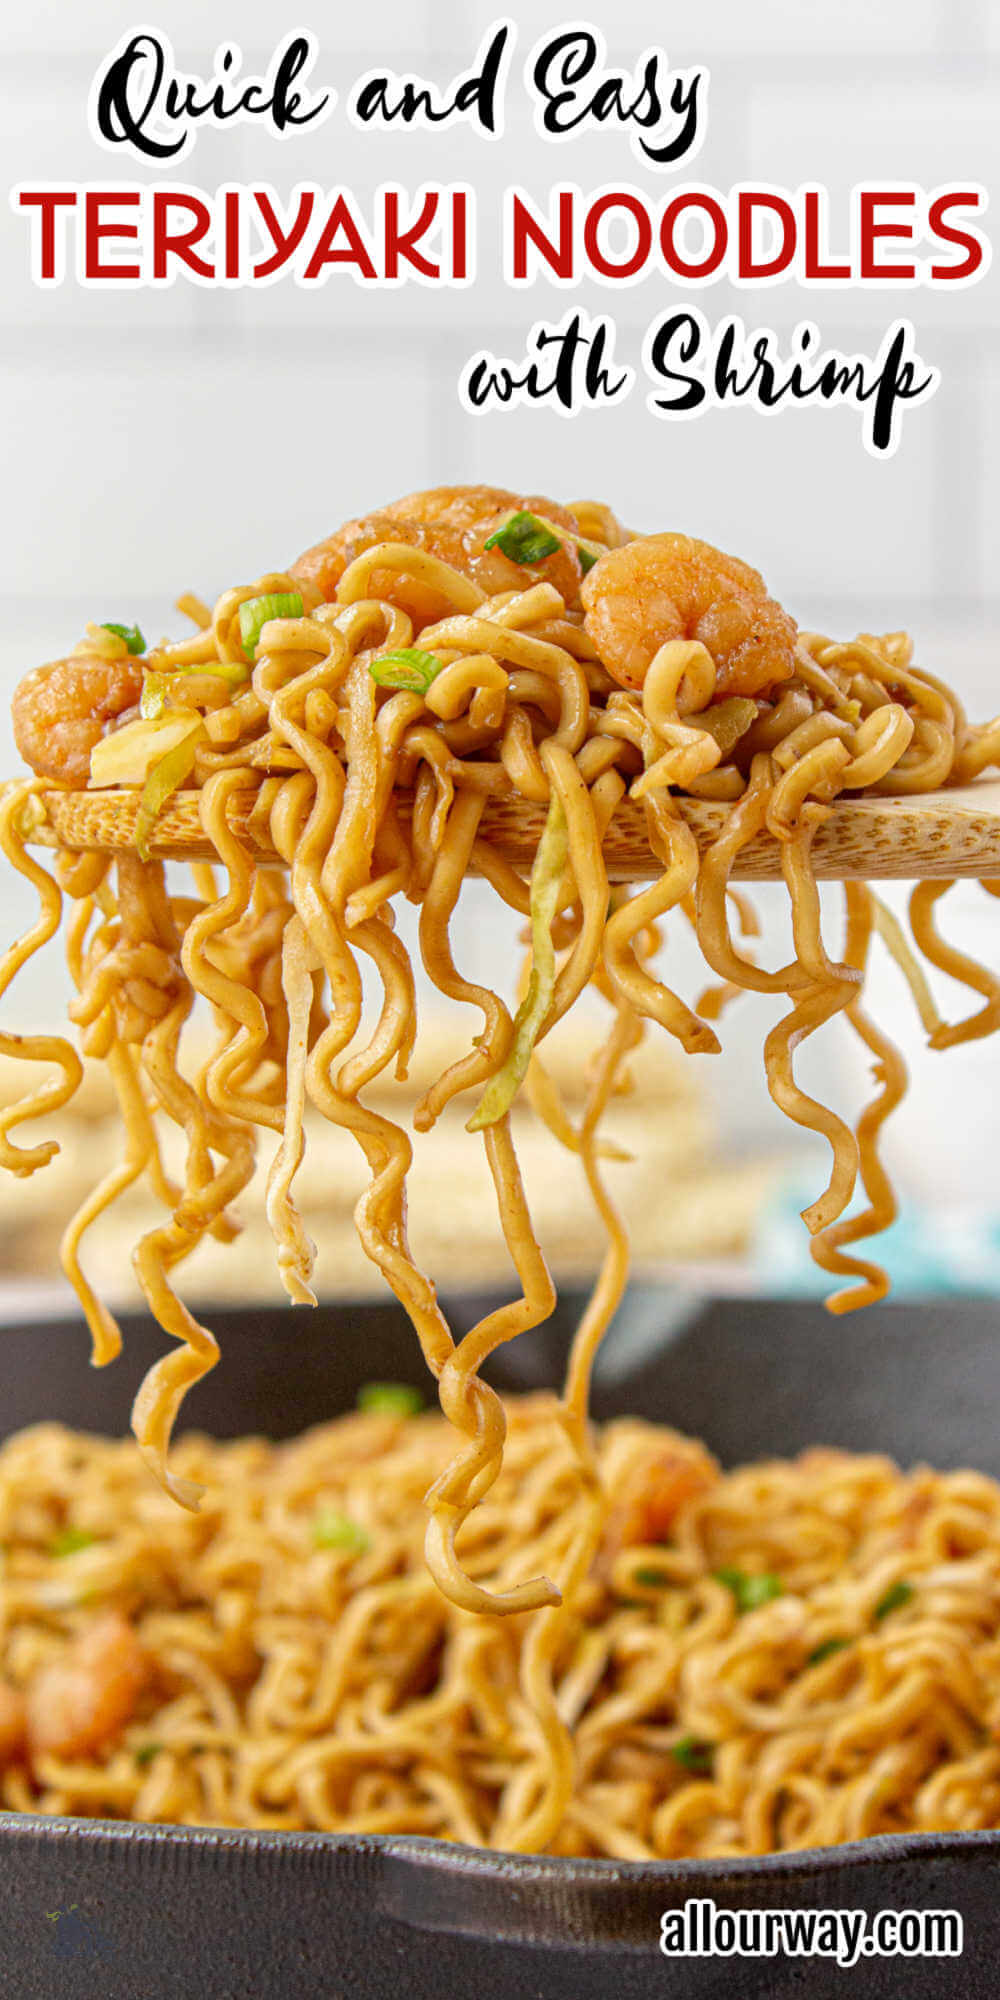 Pinterest image with title overlay of ramen noodles made teriyaki style with shrimp added.